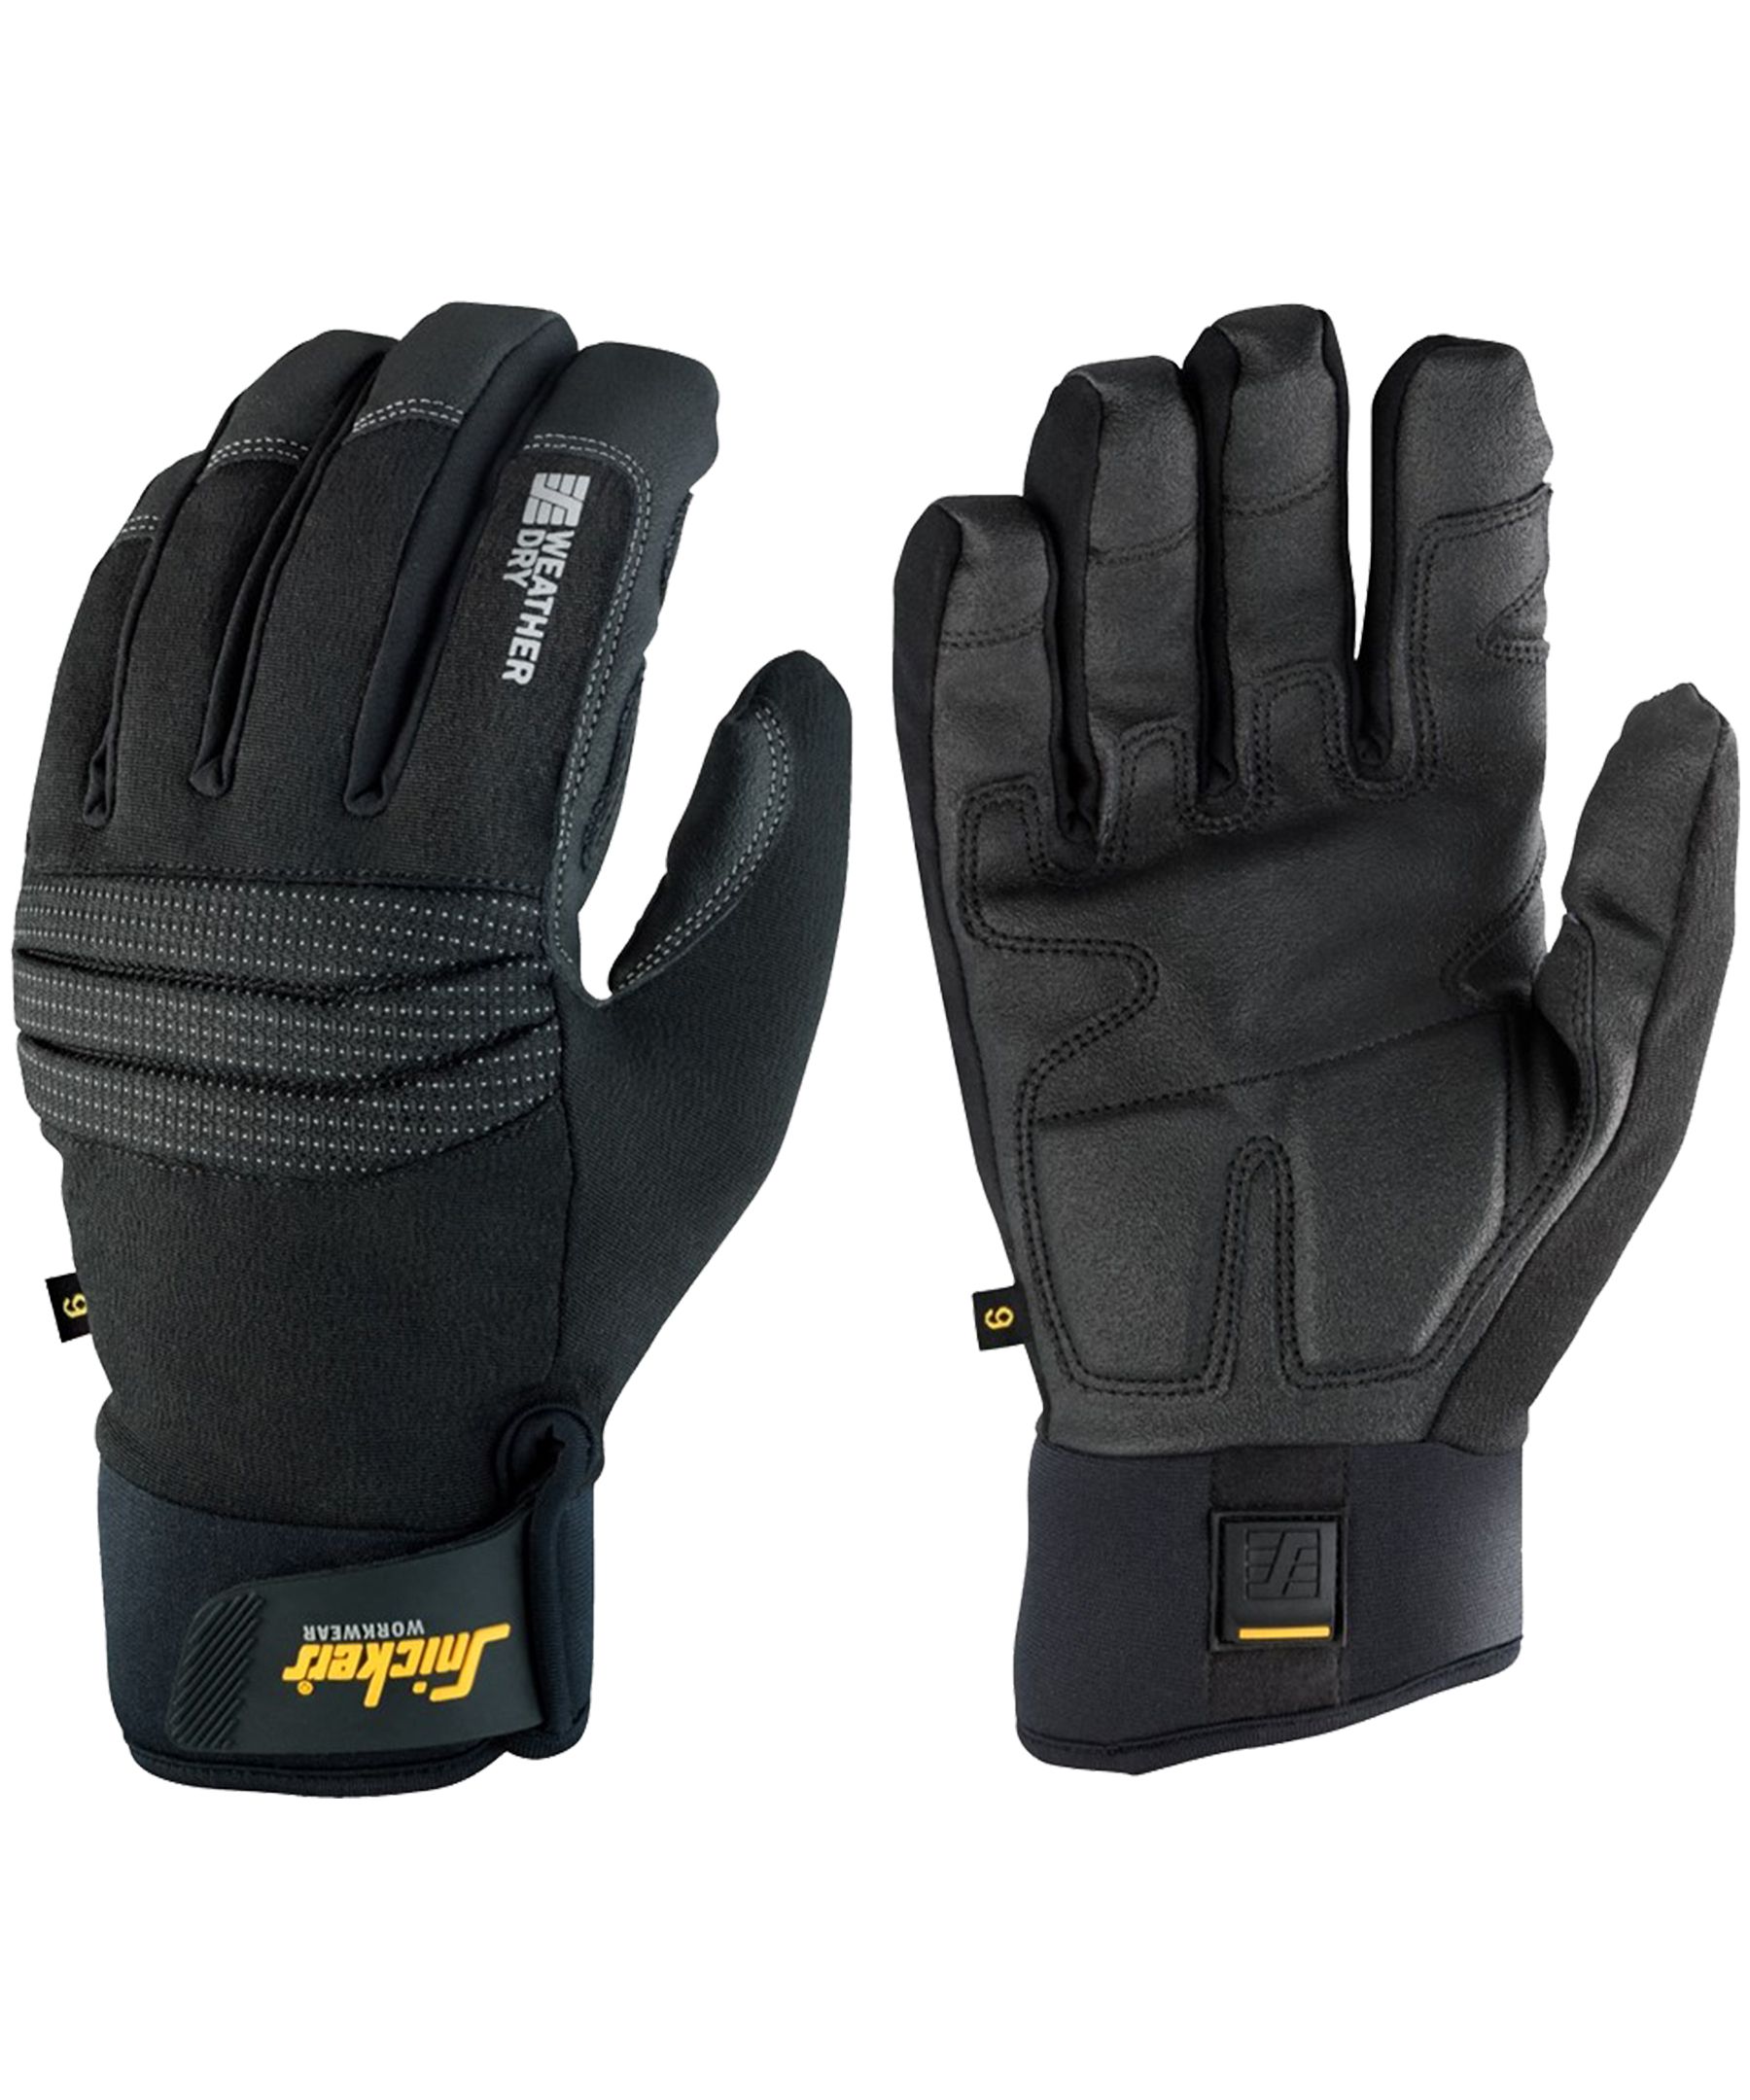 https://media-www.marks.com/product/marks-work-wearhouse/industrial-world/mens-accessories/410037308695/ea-snickers-weather-dry-gloves-f23-8b0a7514-d7f3-4d47-972b-e0519177a613-jpgrendition.jpg